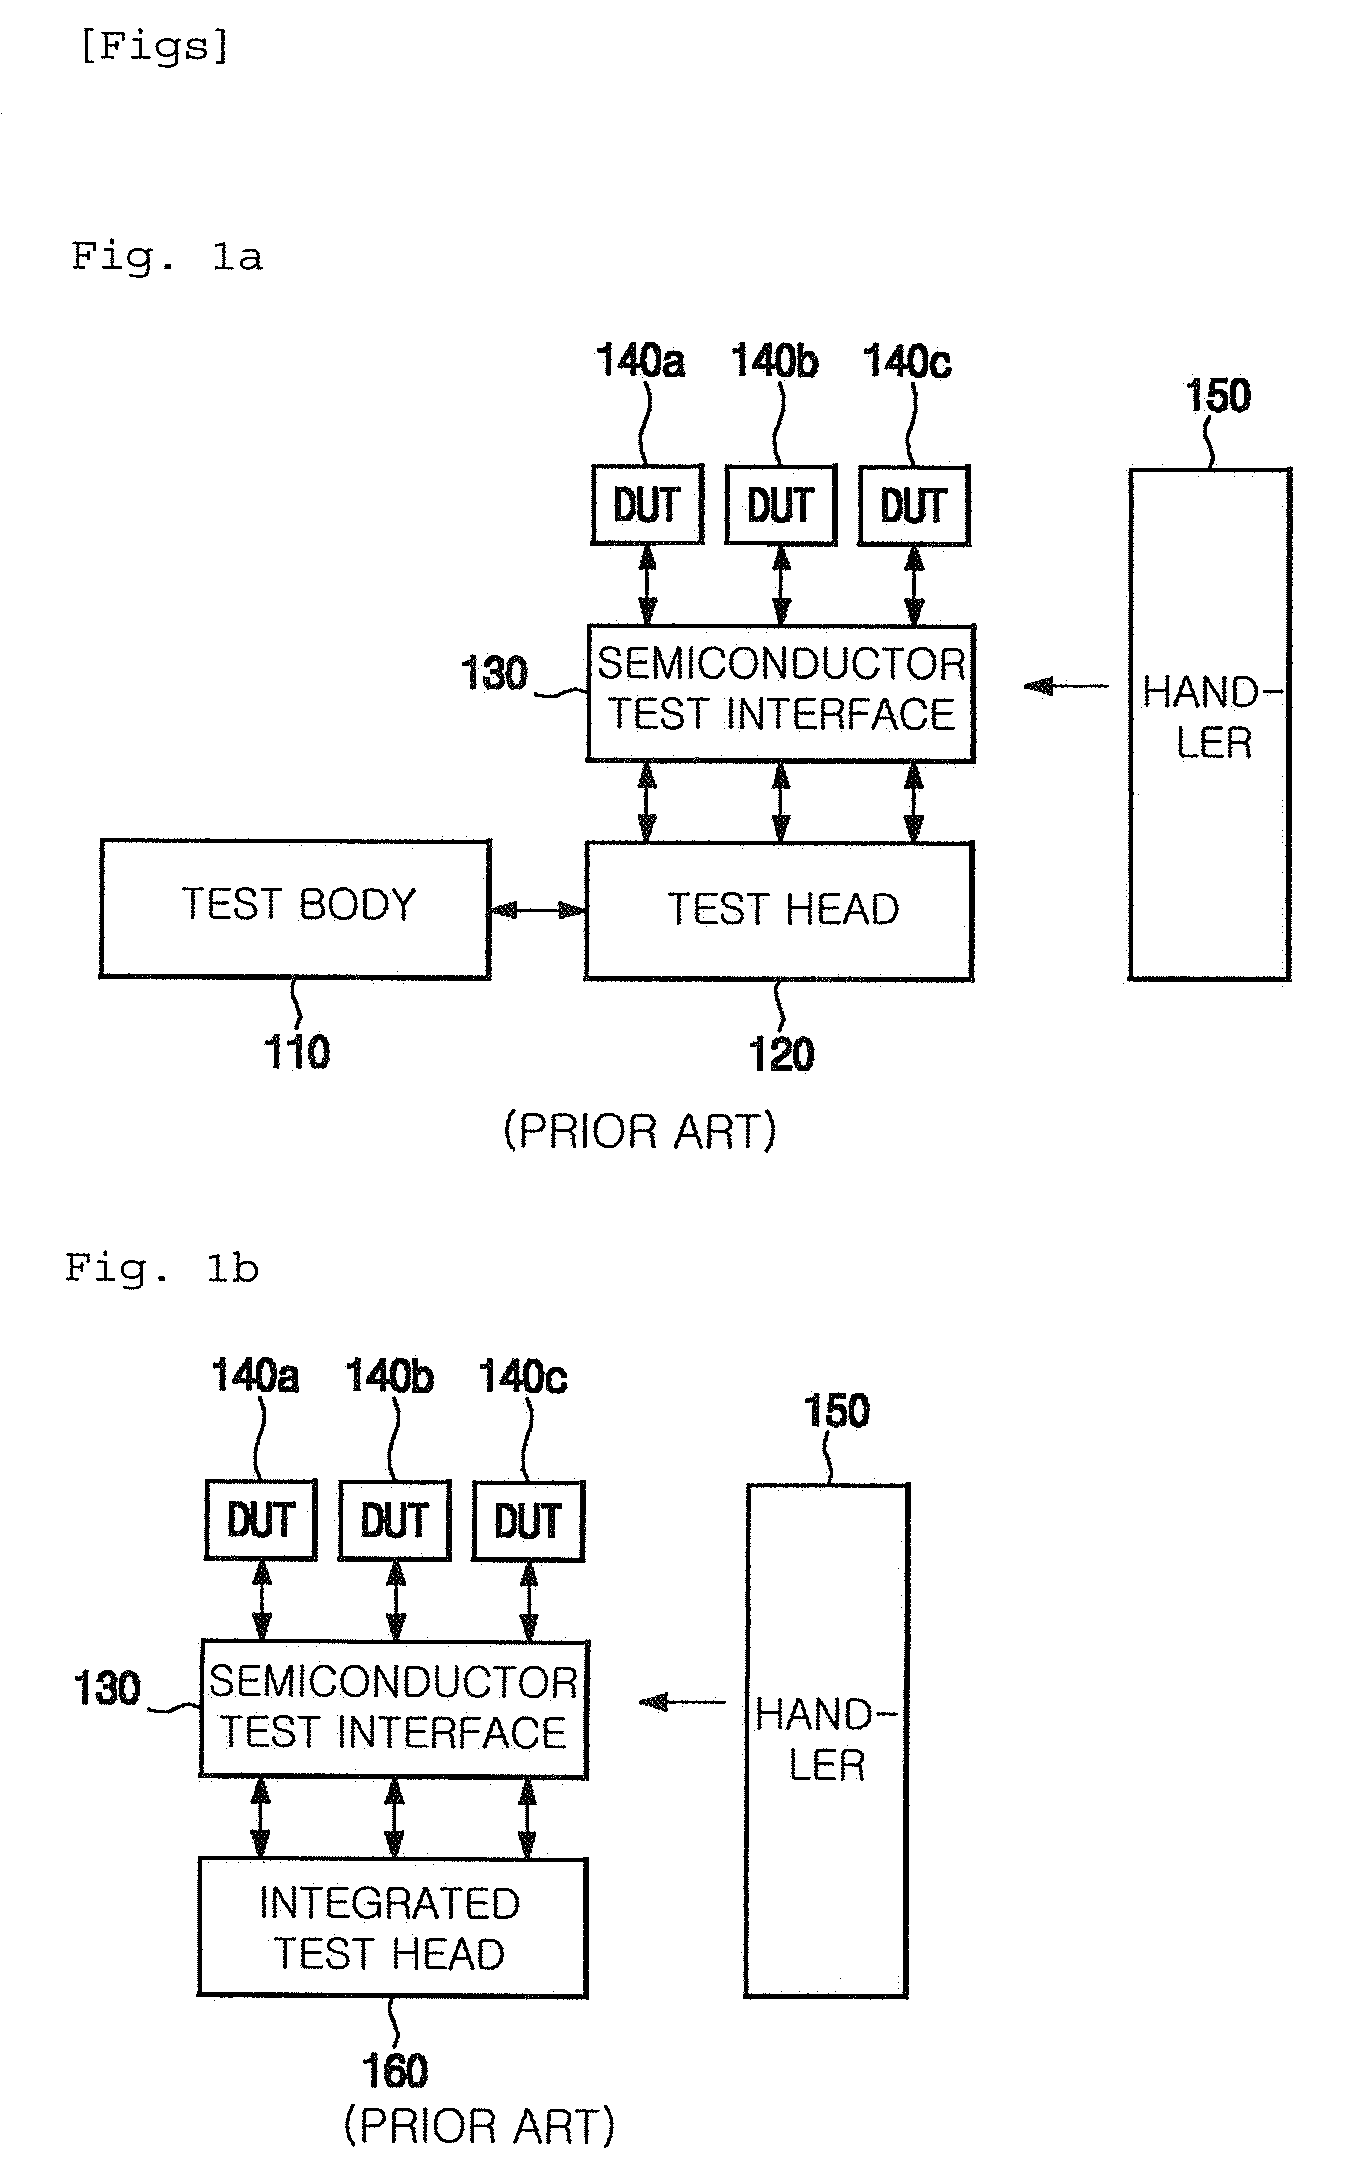 Semiconductor test interface